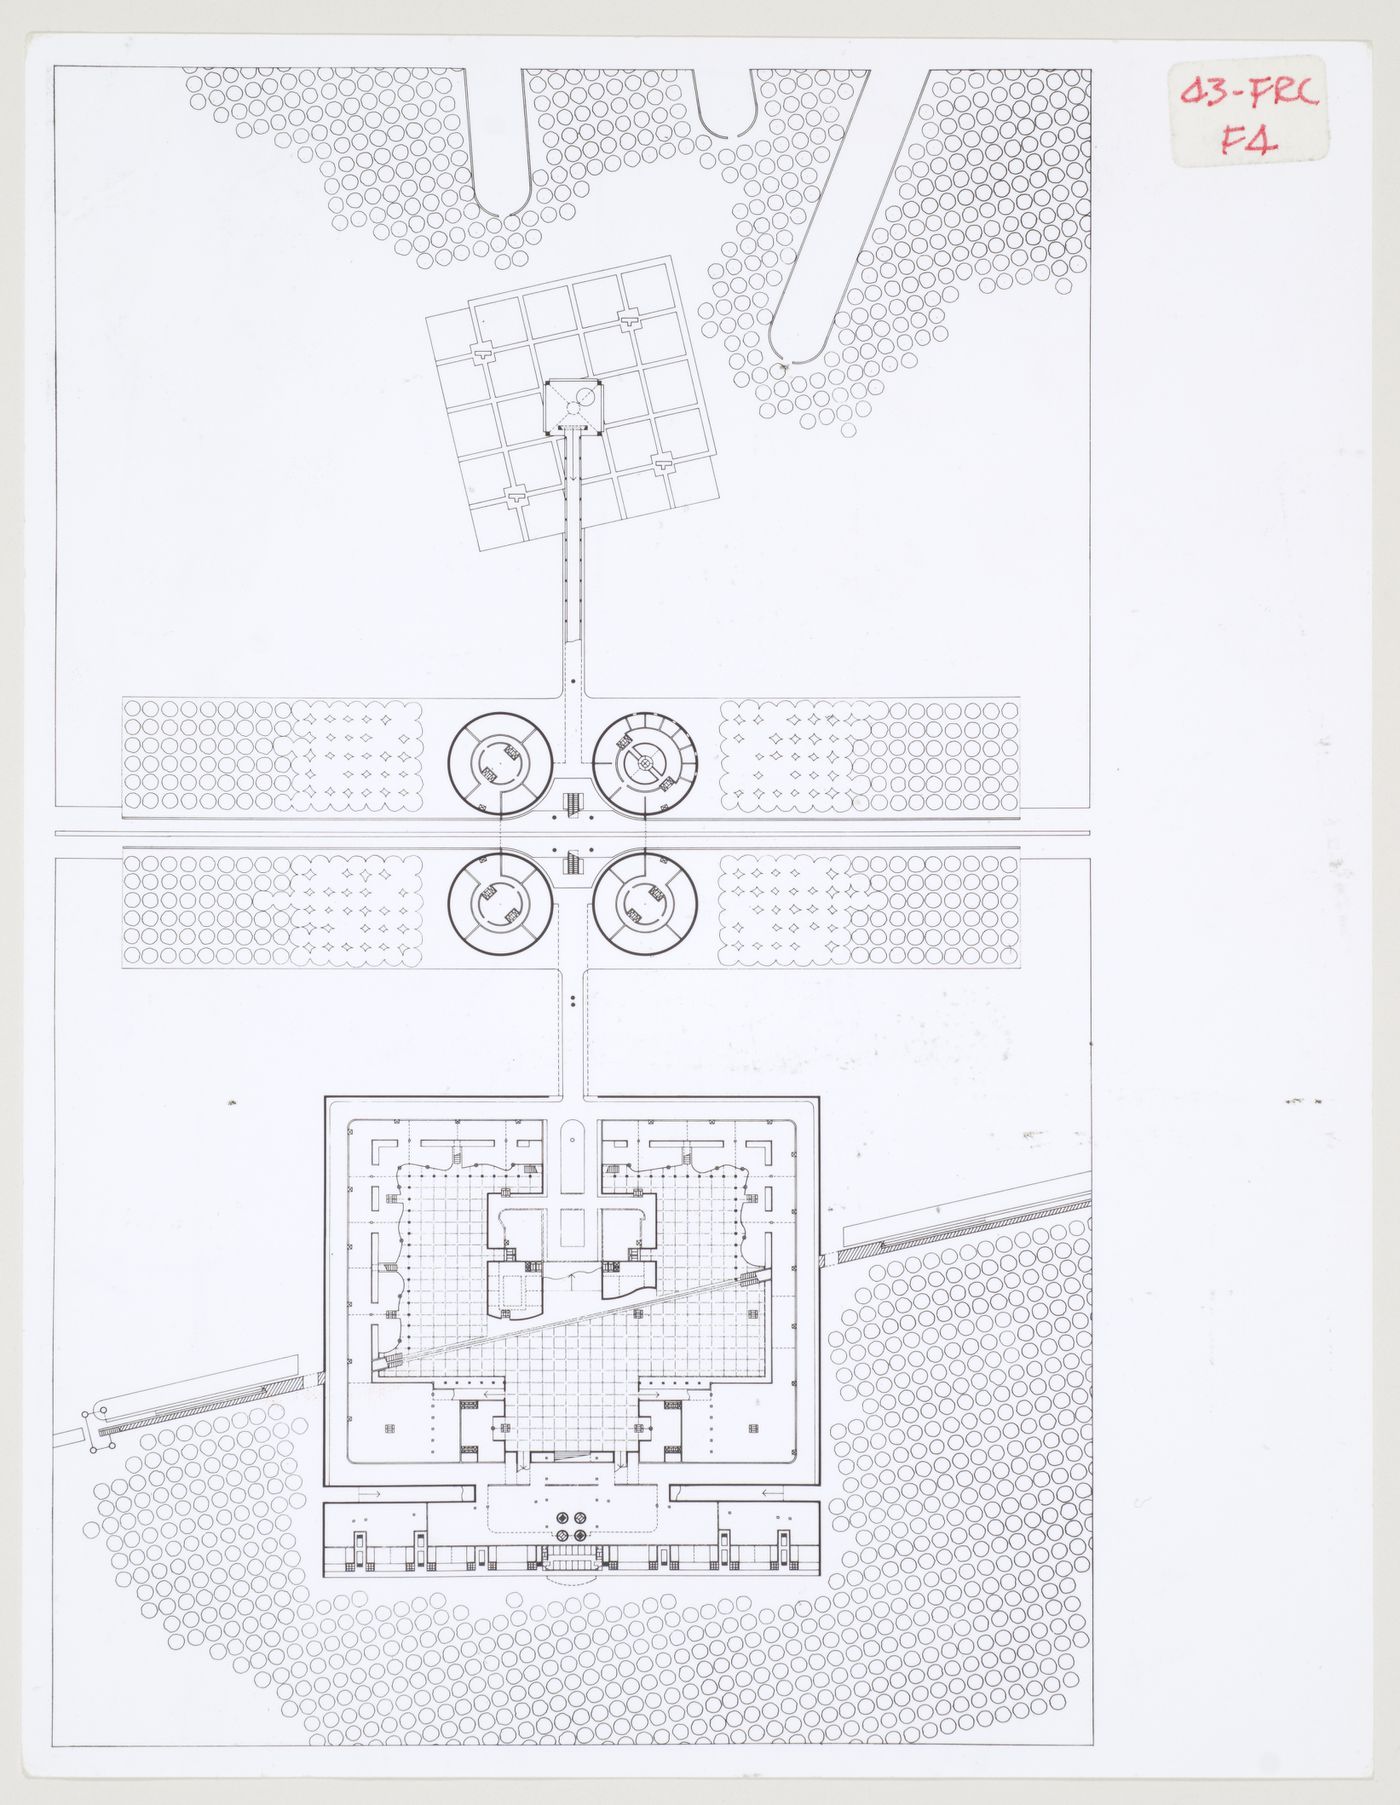 Administrative and Business Centre, Florence, Italy: view of plan